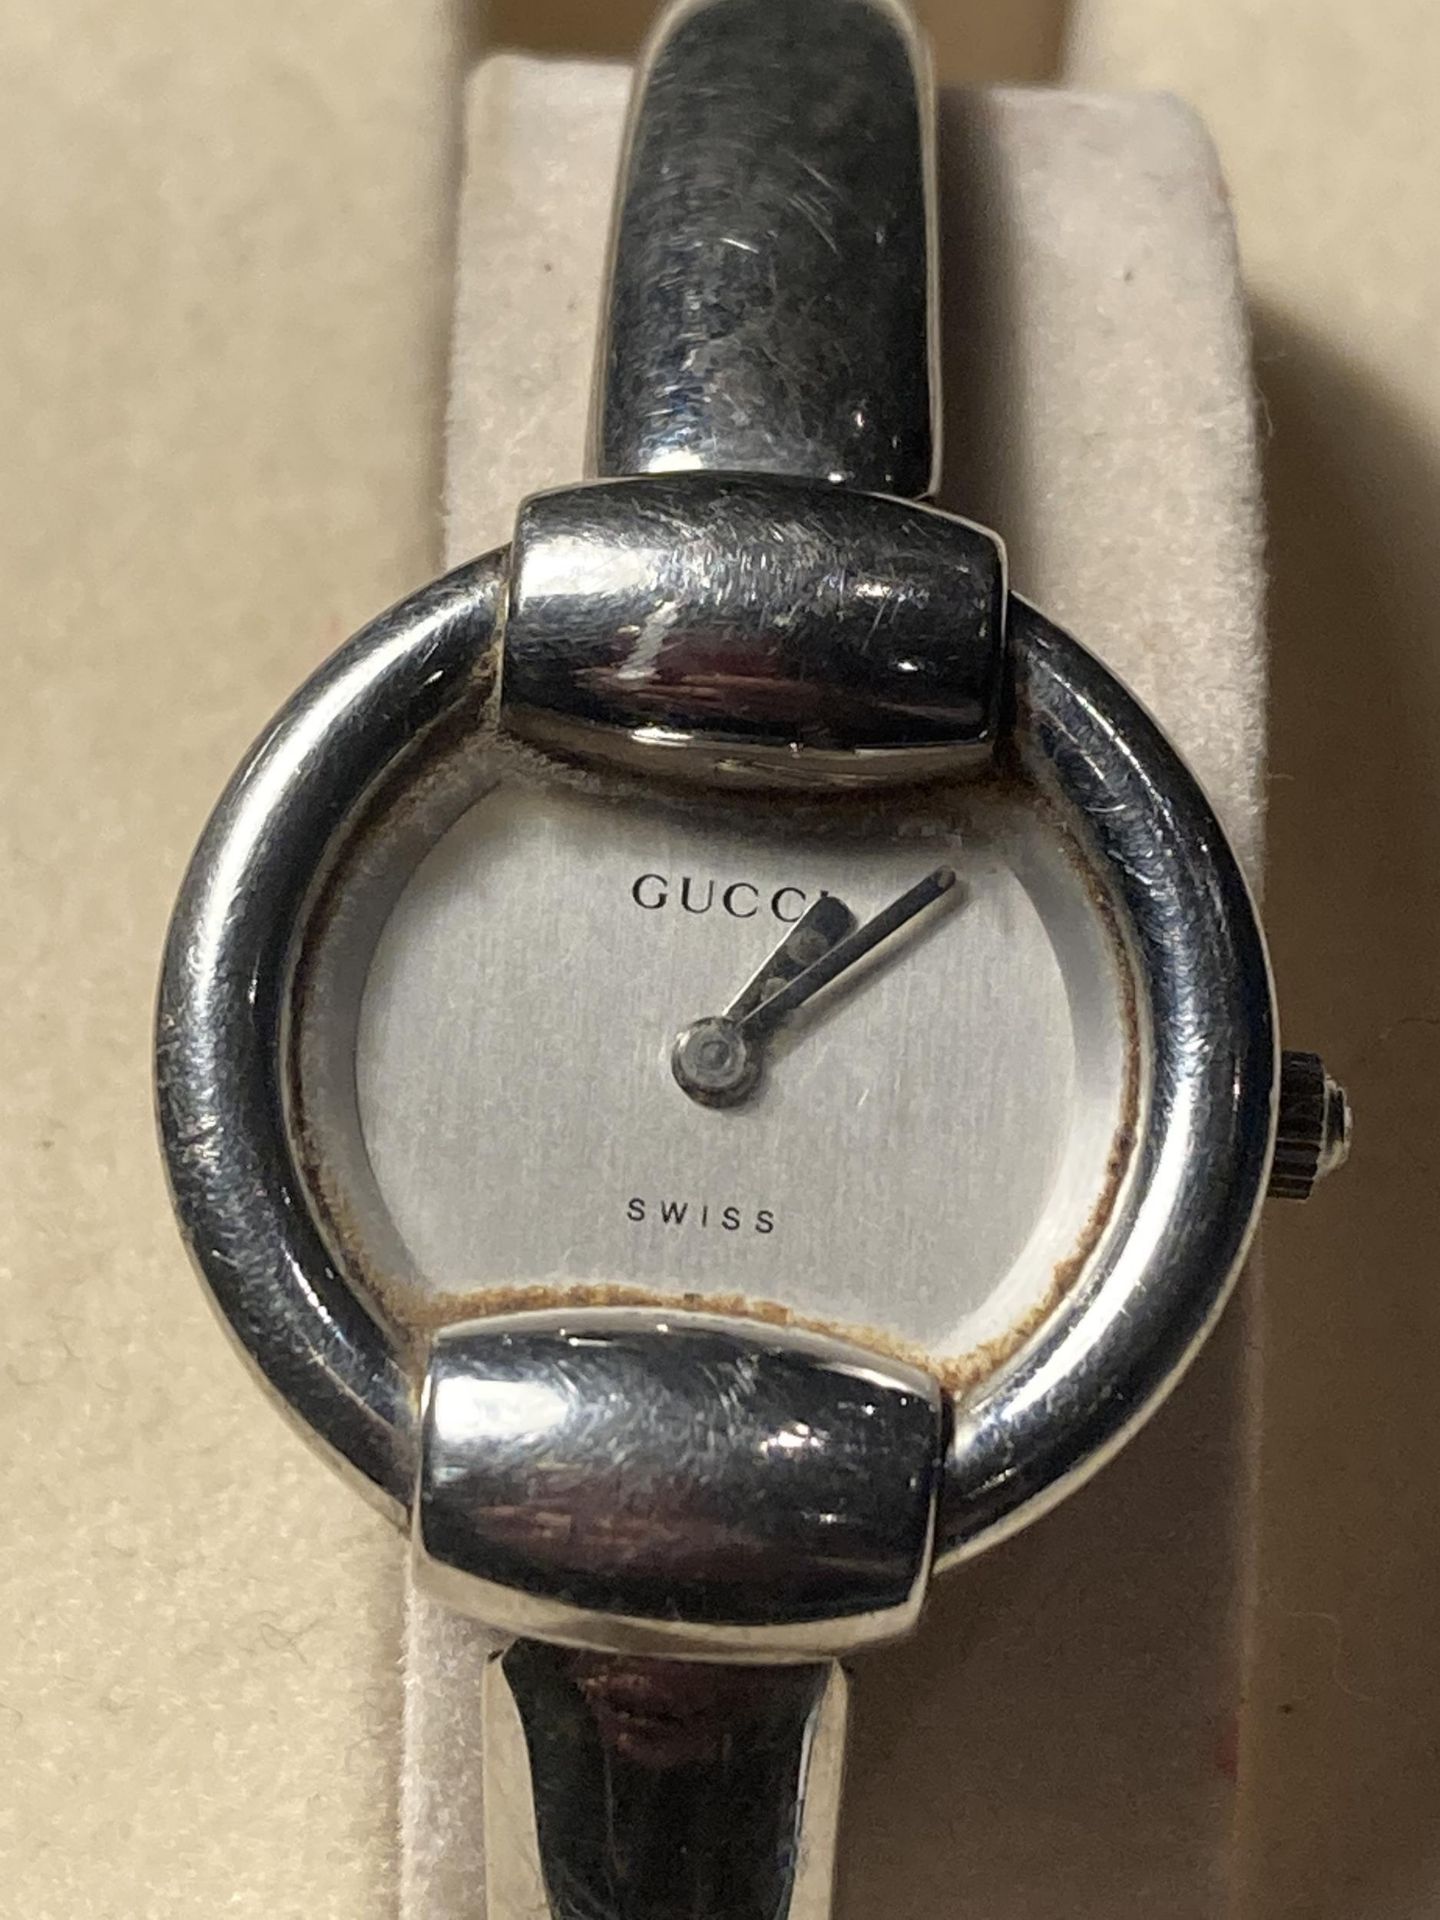 A GUCCI 1400L SWISS QUARTZ 3ATM ANALOGUE STAINLESS LADIES WRIST WATCH IN ORIGINAL PRESENTATION - Image 2 of 6